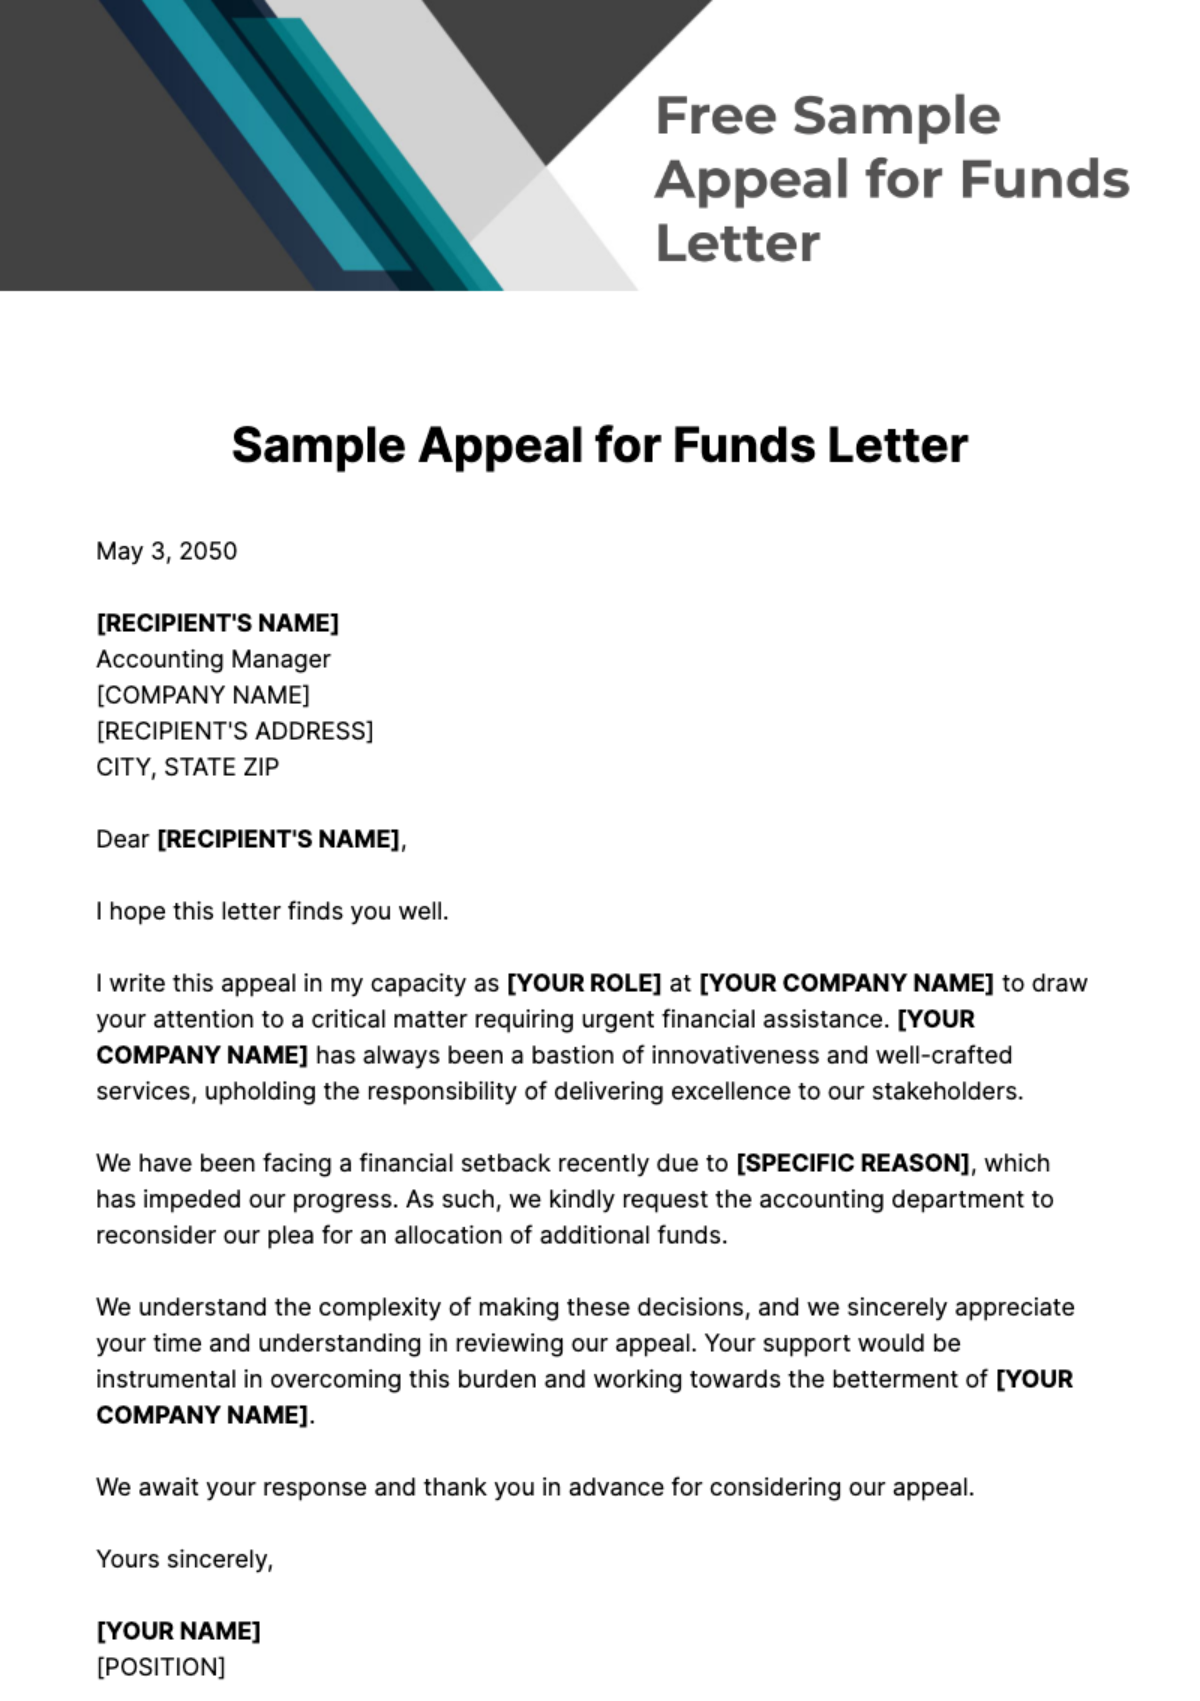 Free Sample Appeal for Funds Letter Template